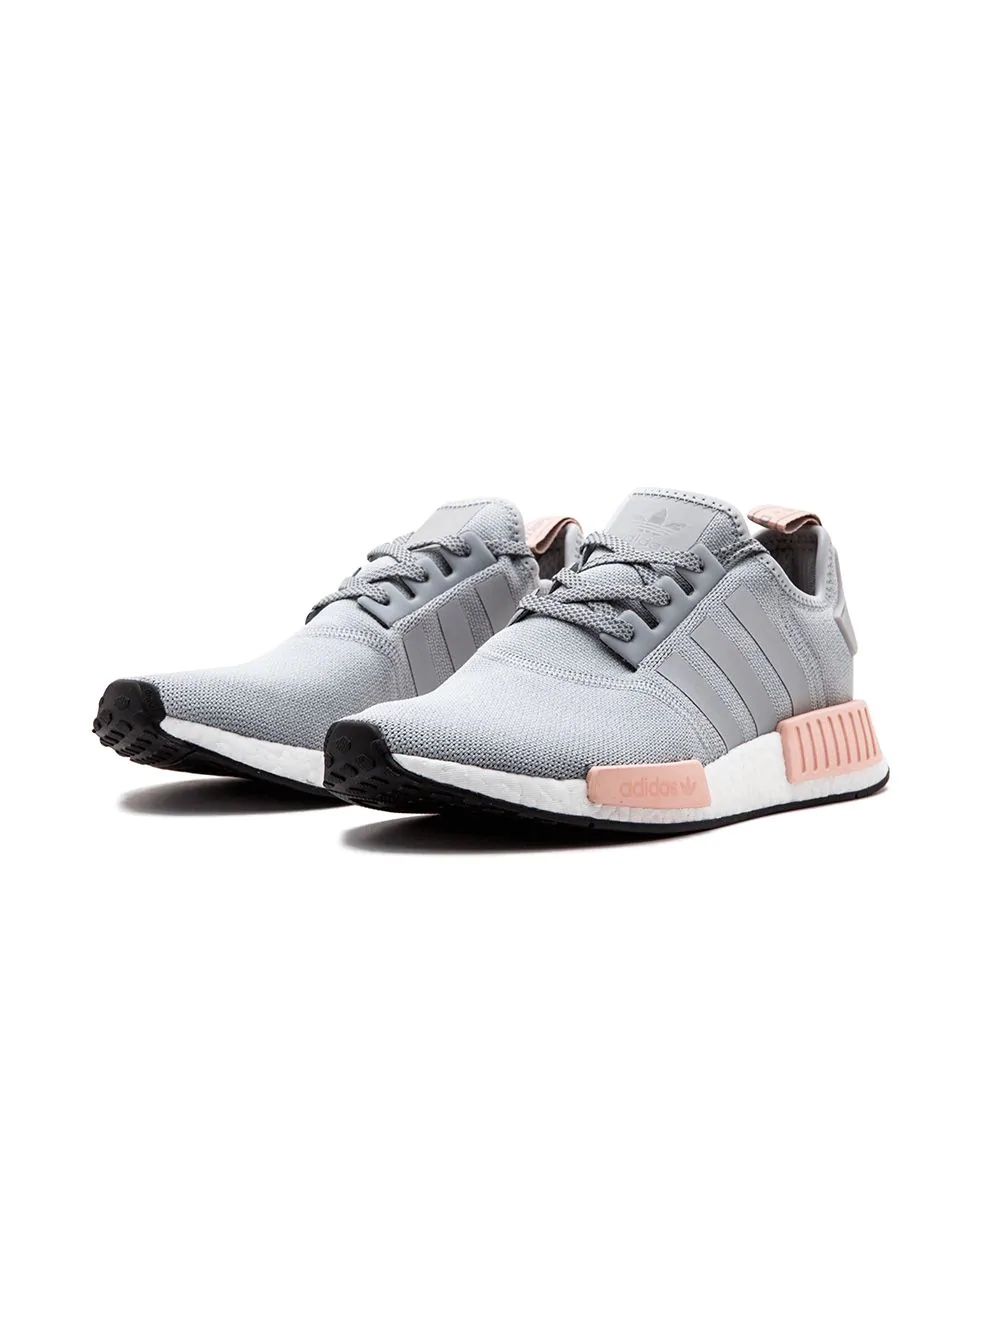 NMD_R1 W sneakers - 2